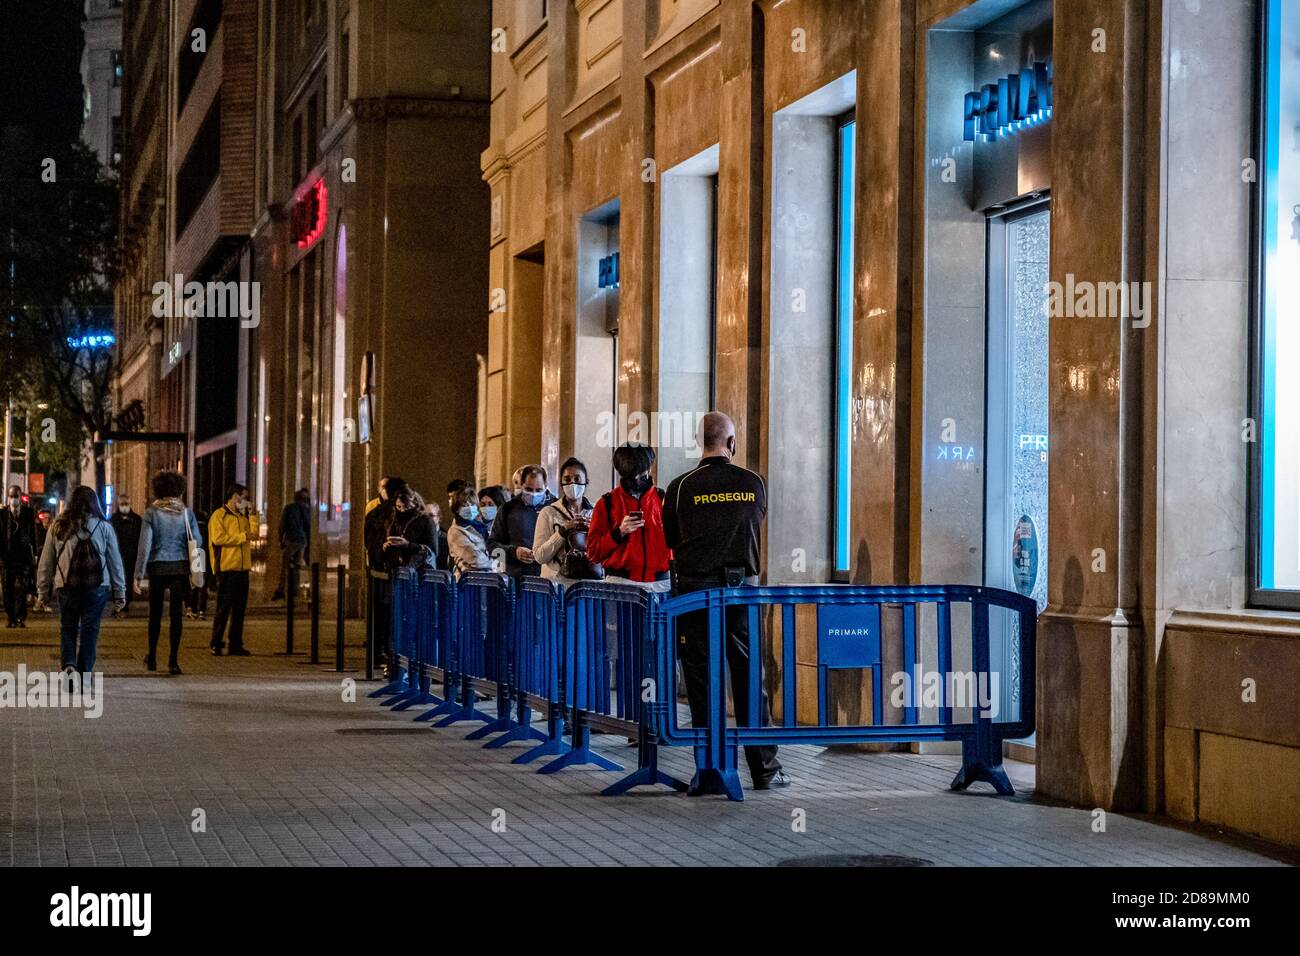 Barcelona, Spain. 27th Oct, 2020. Several people are seen queuing to enter the Appel store in Plaza Catalunya with less than an hour left before start of curfew. The pandemic situation worsens in Barcelona due to the rising cases of Covid19 infections. Barcelona will have to face new restrictive measures for the mobility of citizens starting this week. The cut in business hours advances the closure at 9:00 p.m. and an hour later the start of curfew for all citizens who do not have a proof of authorized mobility. Credit: SOPA Images Limited/Alamy Live News Stock Photo